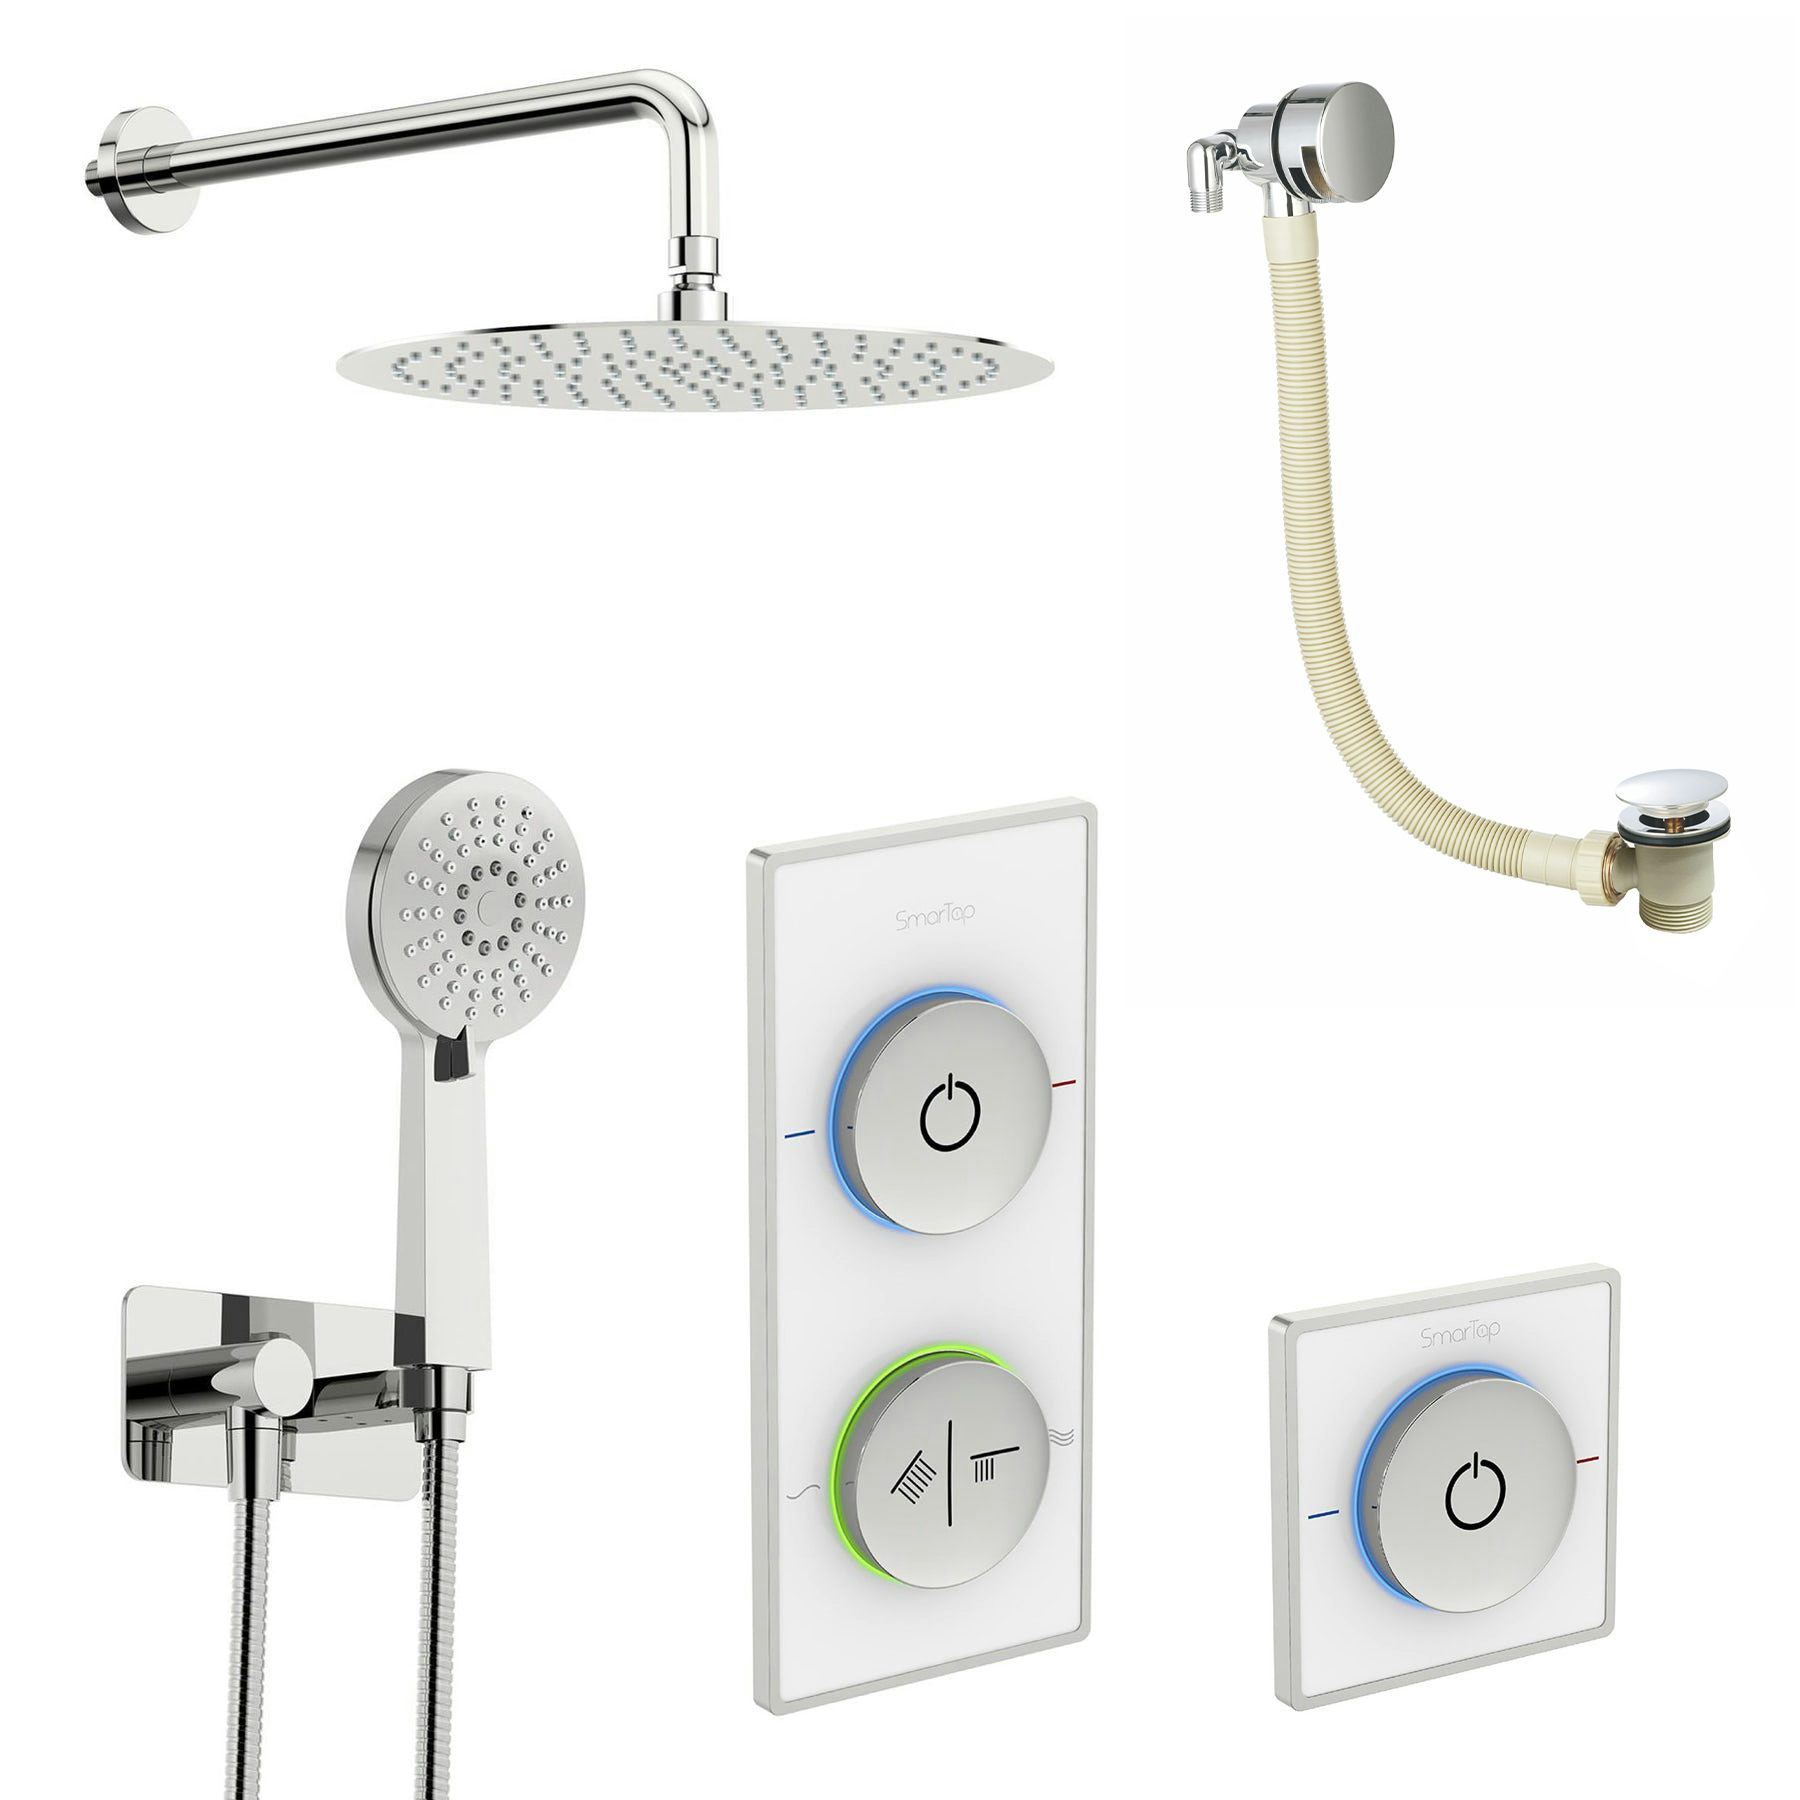 SmarTap white smart shower system with complete round wall shower outlet bath set